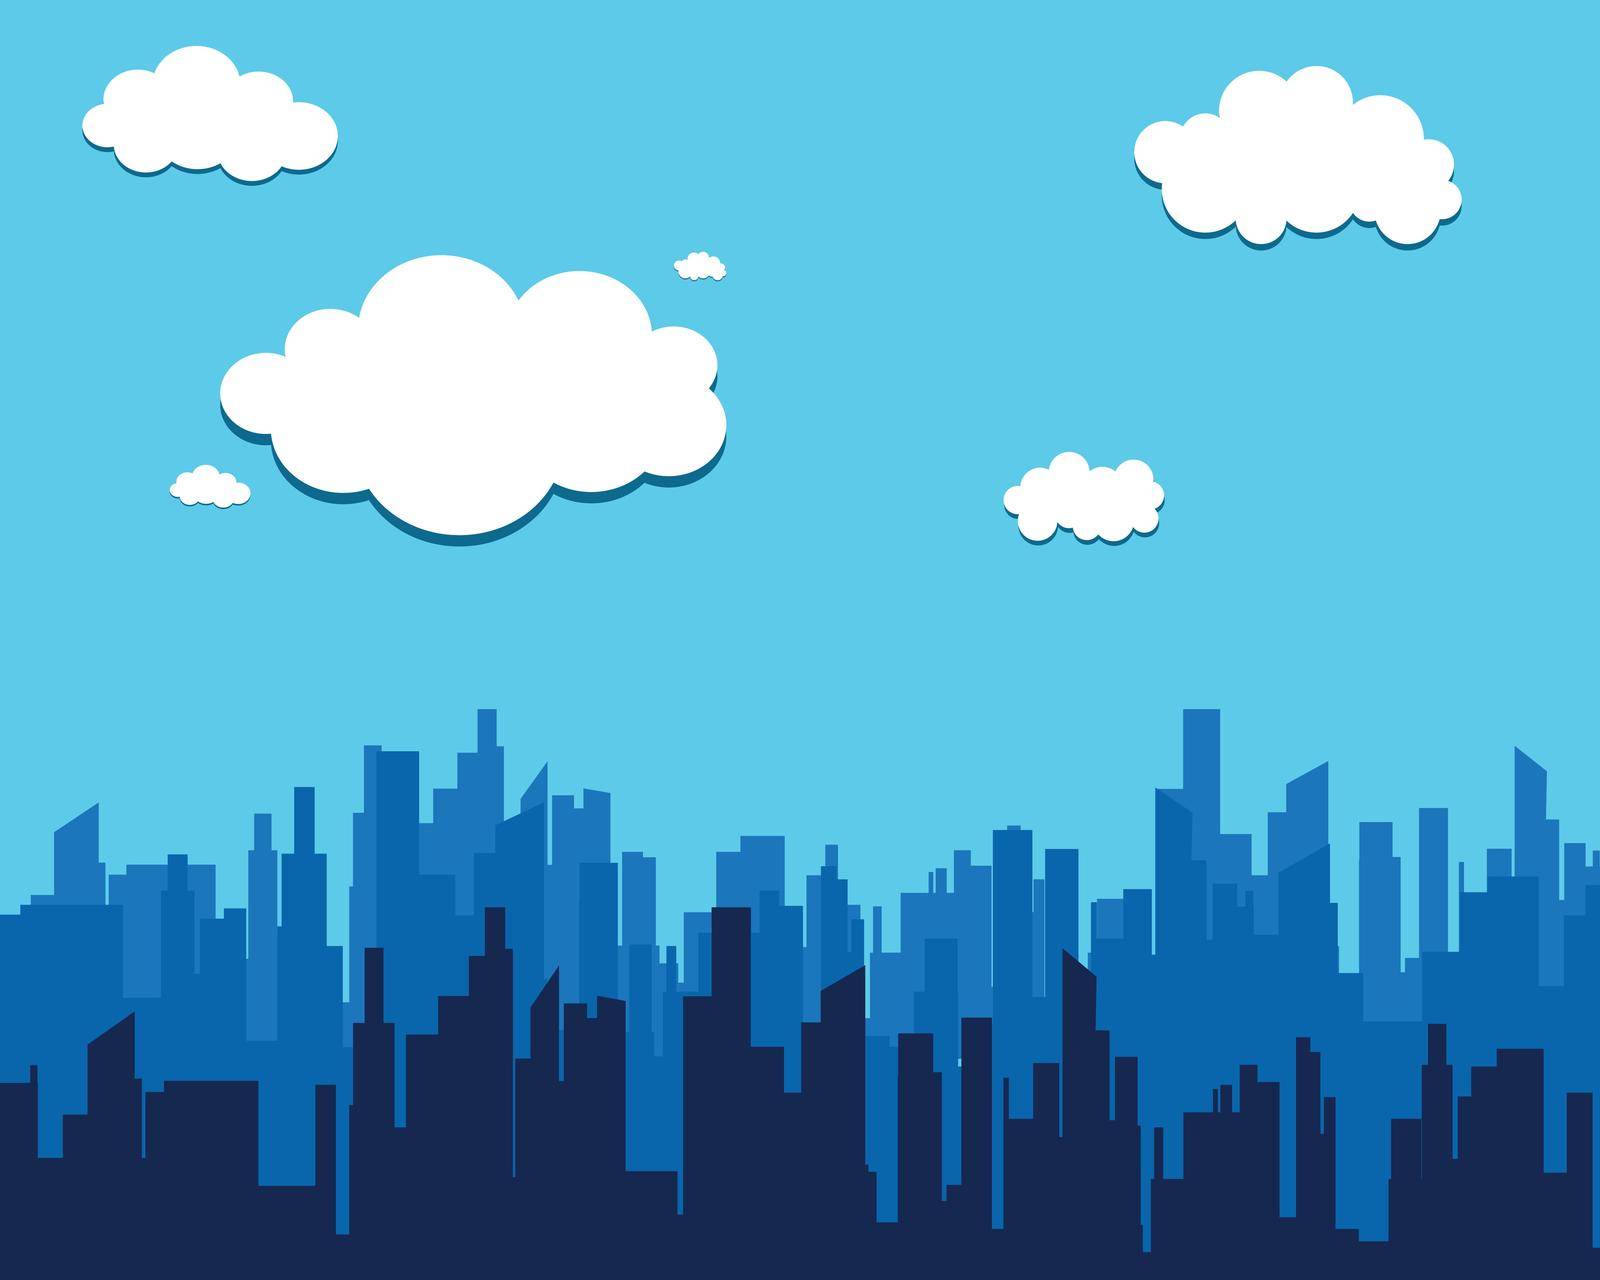 Blue sky with cloud icon illustration design